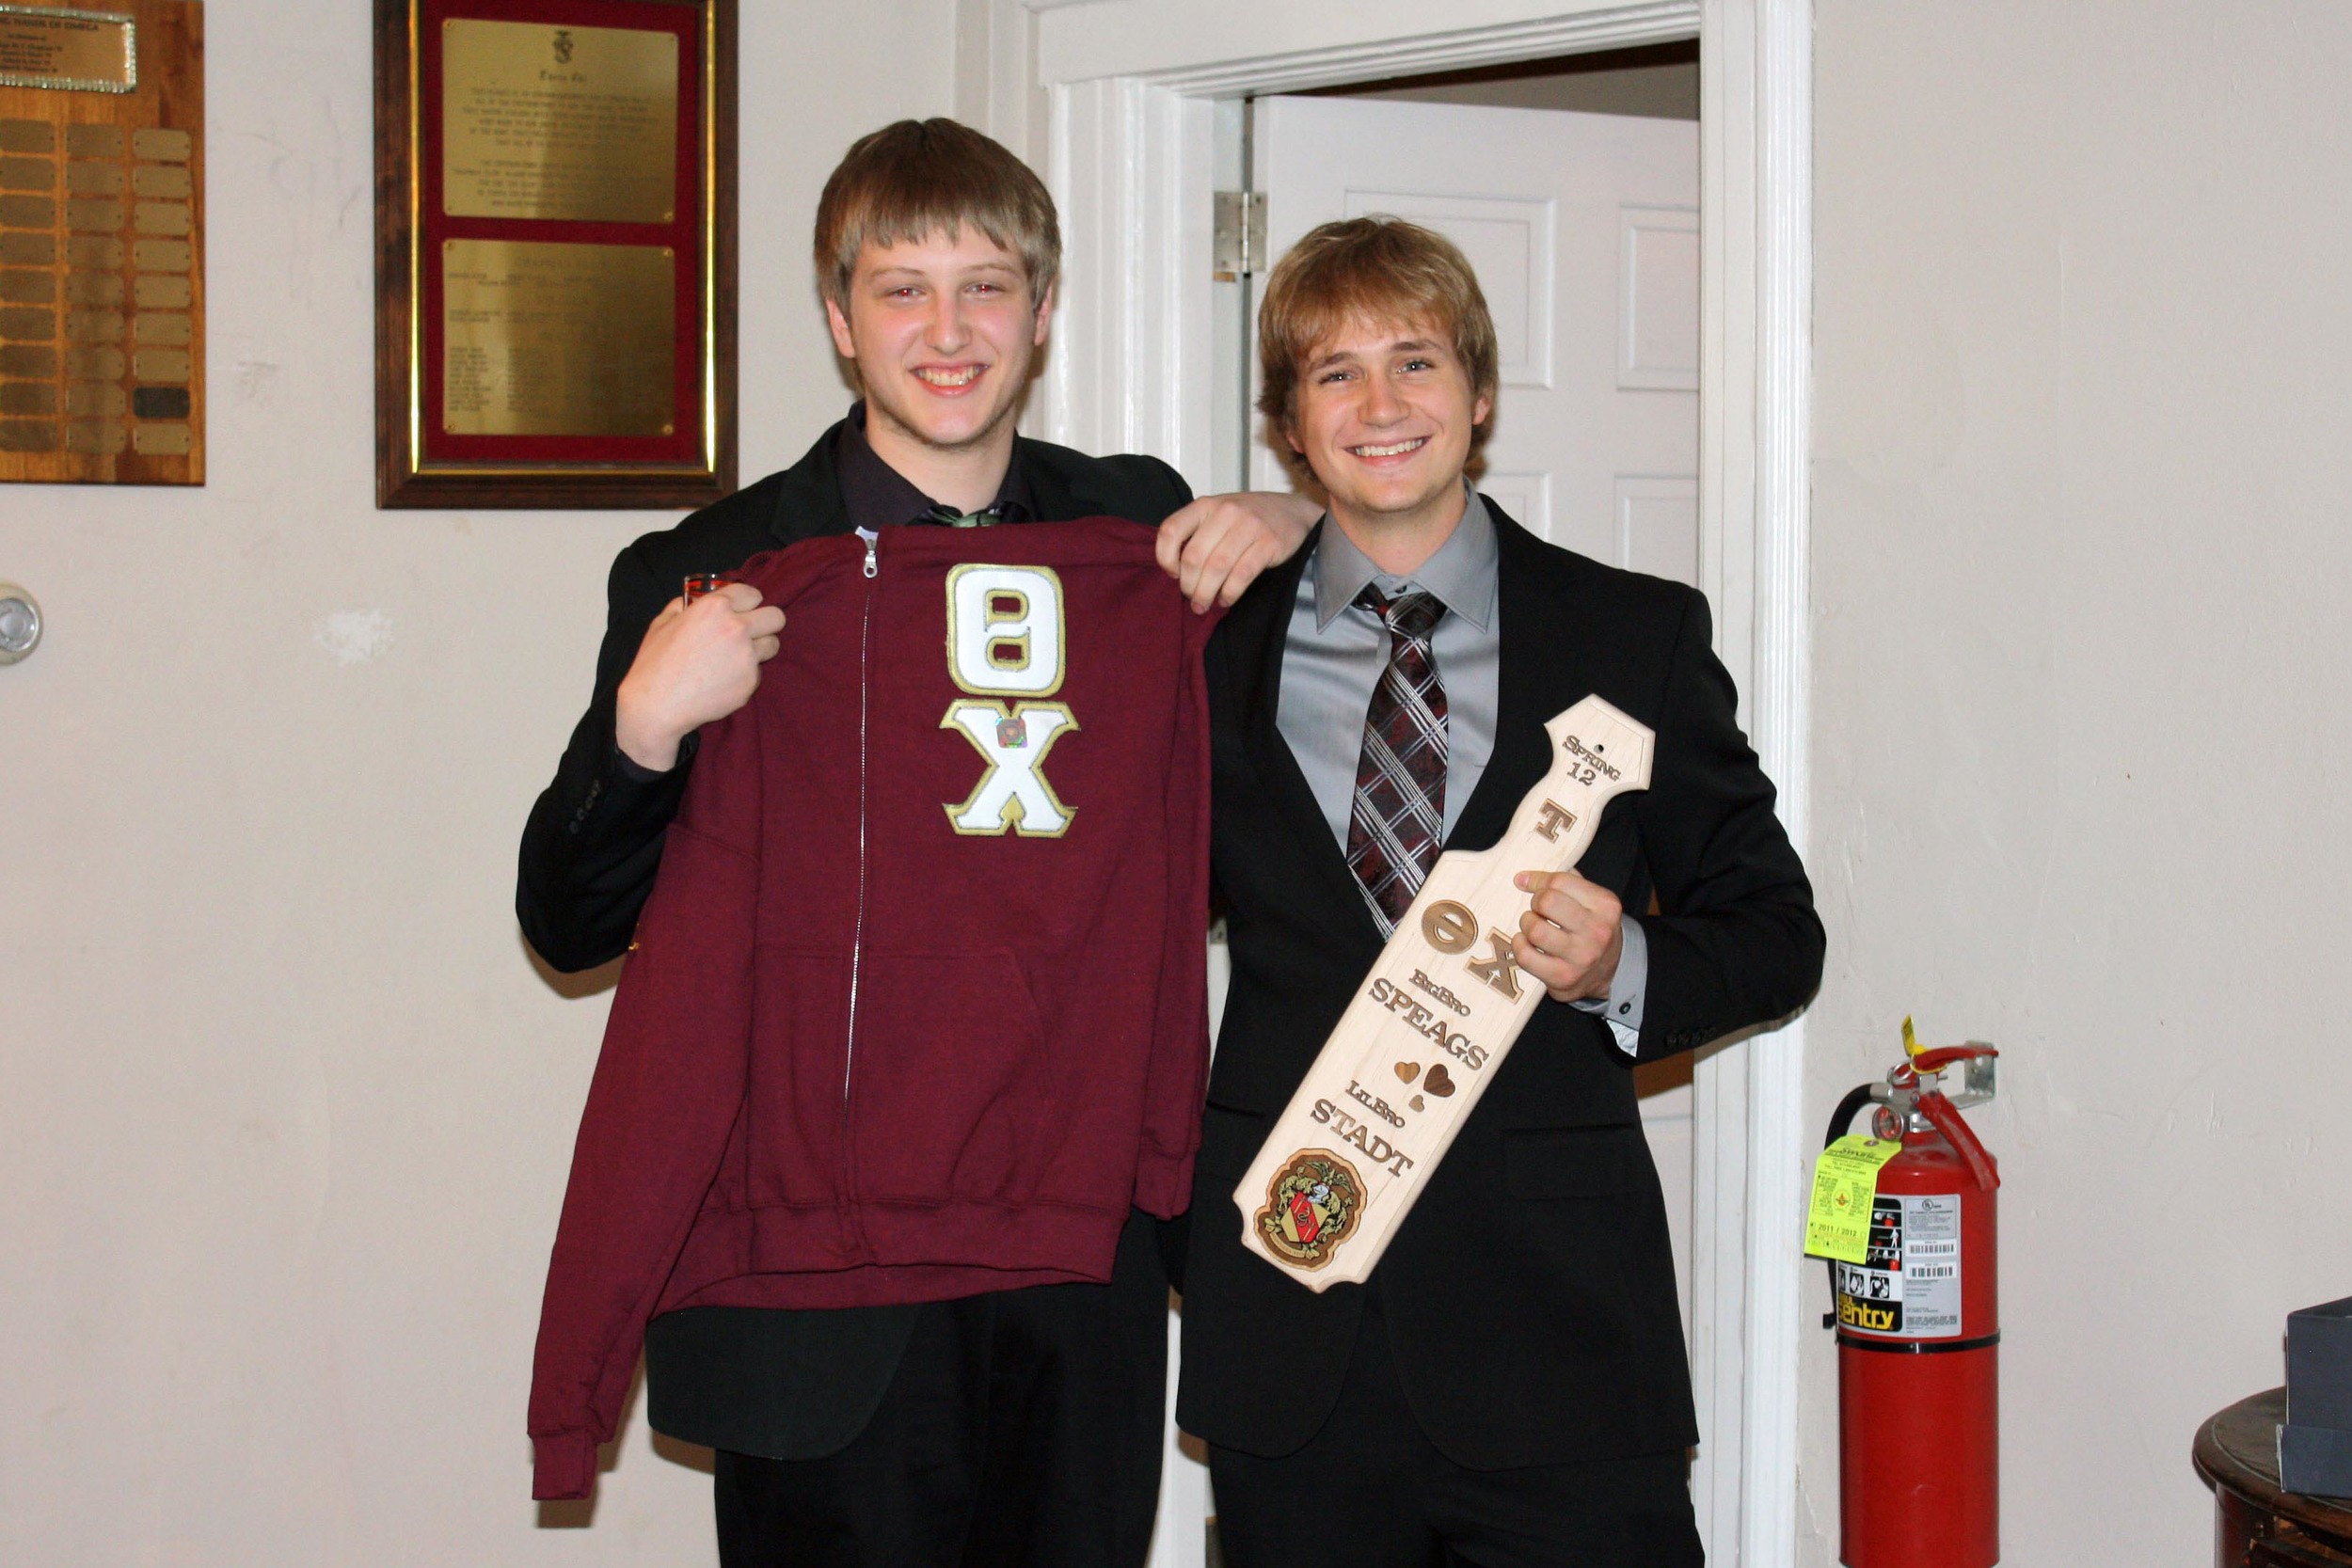  Little Brother Nick Stadtlander (L) and Big Brother Aaron Speagle
Spring 2012 Initiation Night 